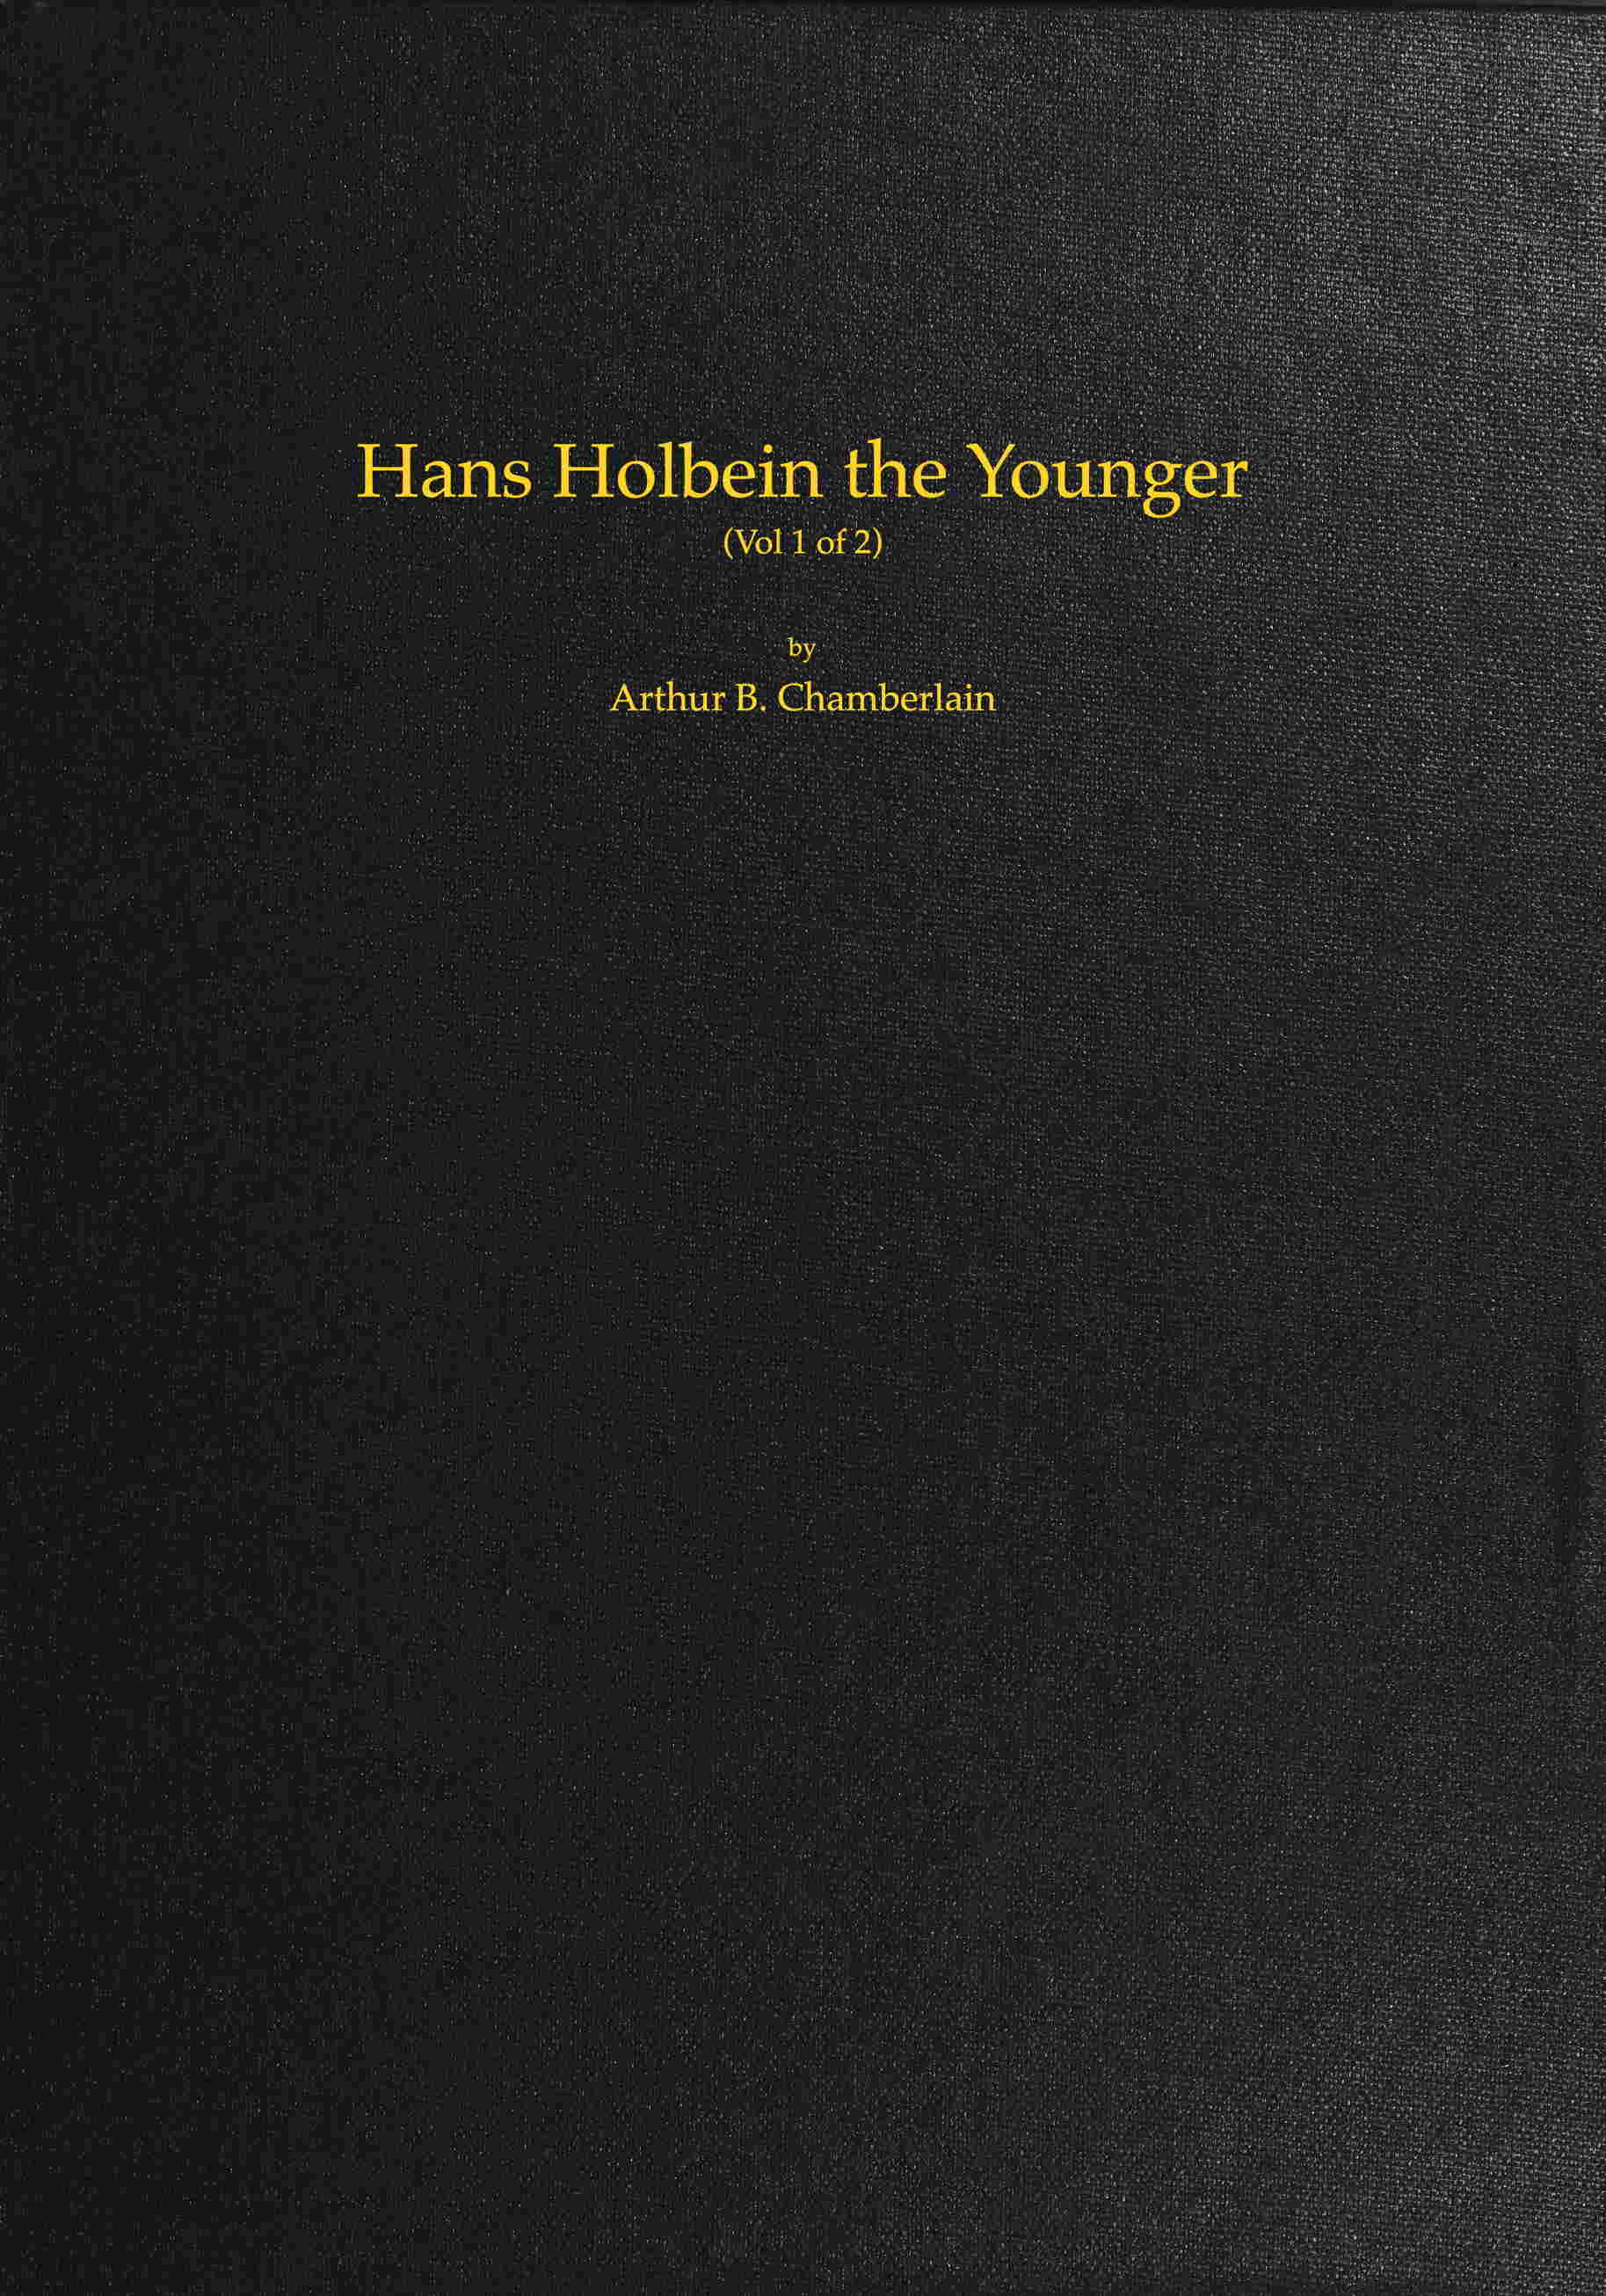 Hans Holbein the Younger, Volume 1 (of 2)